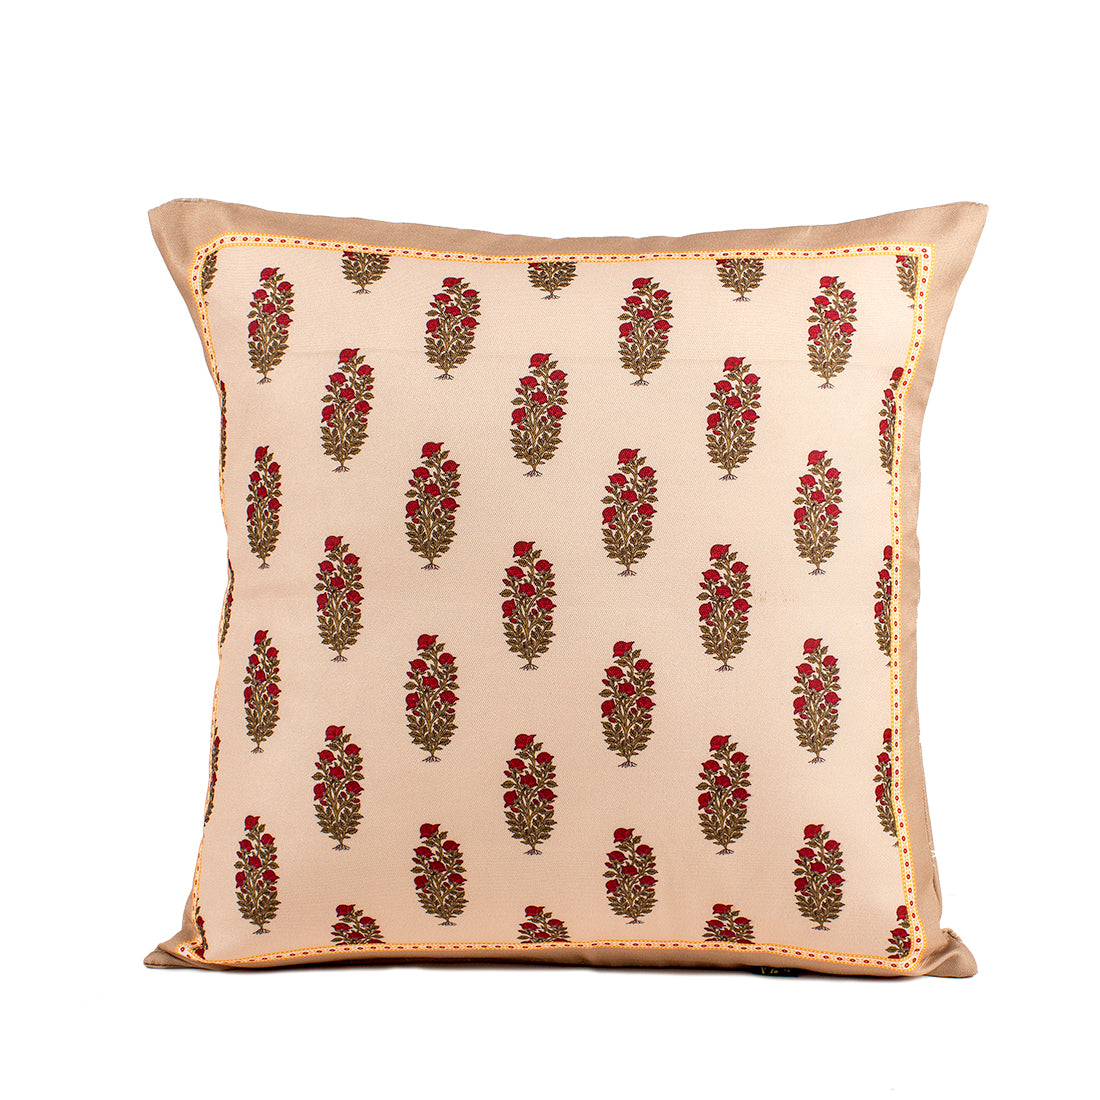 Cushion Cover-Ethnic Collection-32-Set of 2